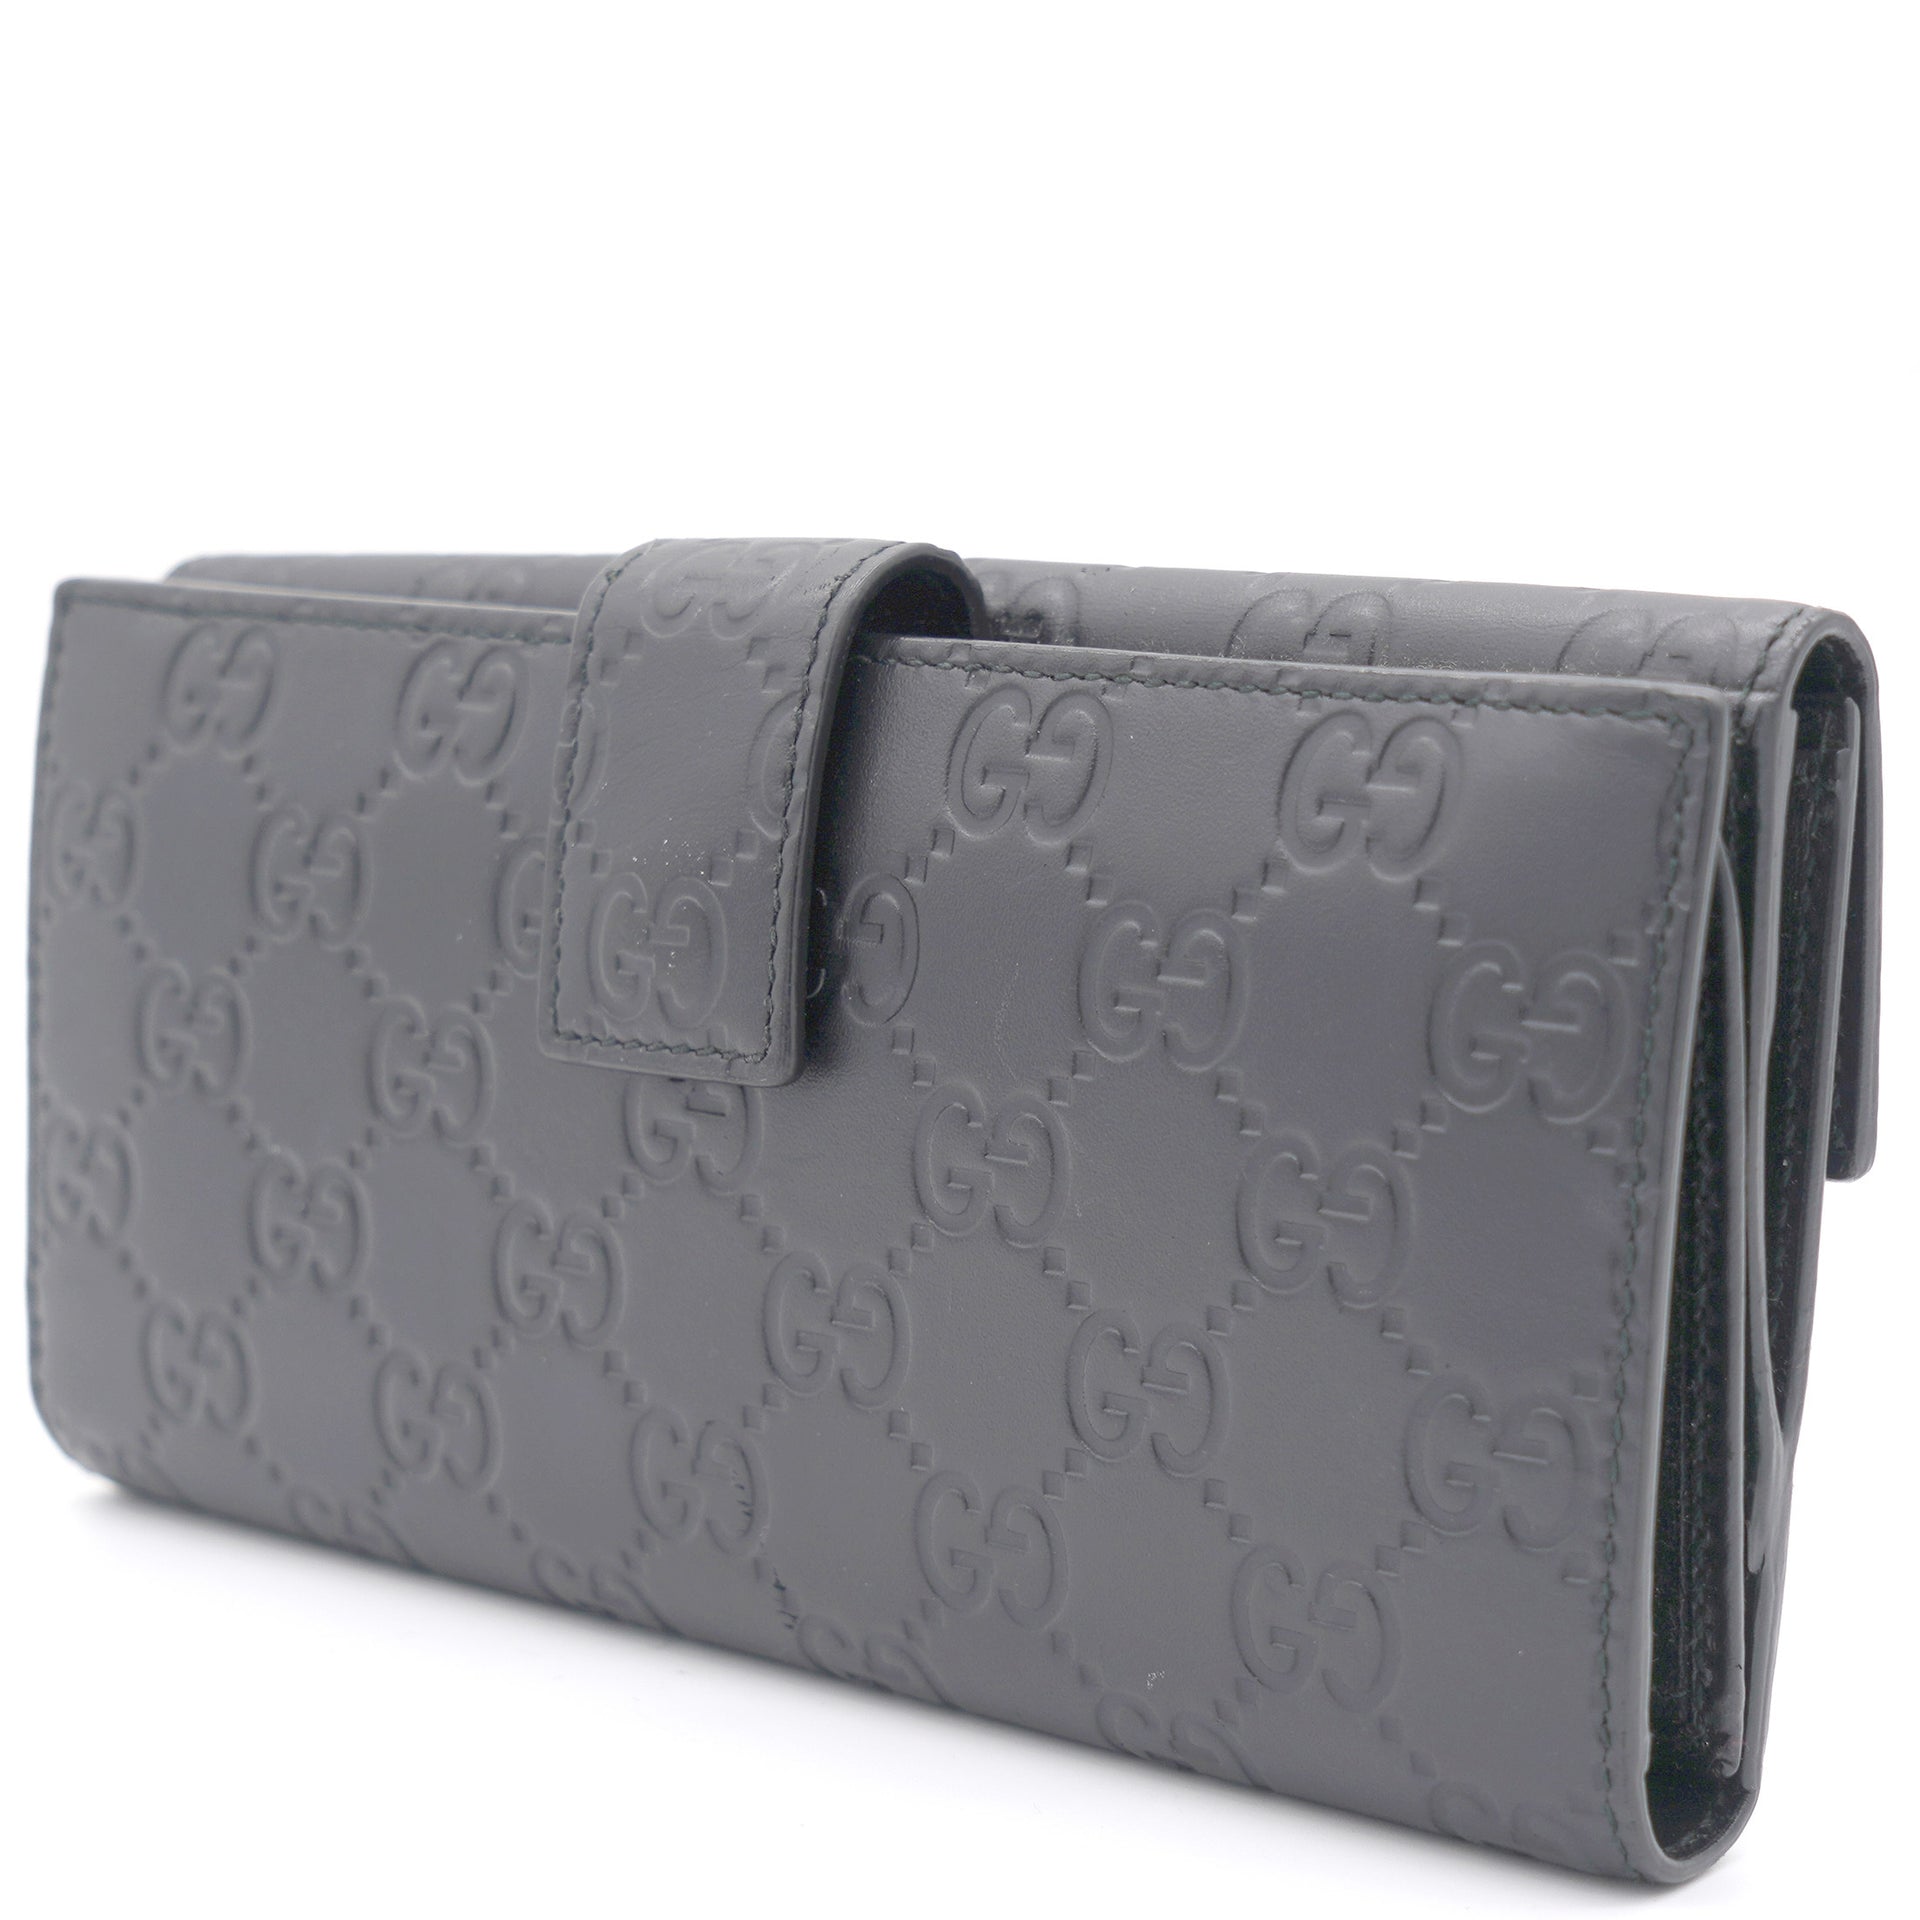 Black Guccissima Leather Flap Long Wallet